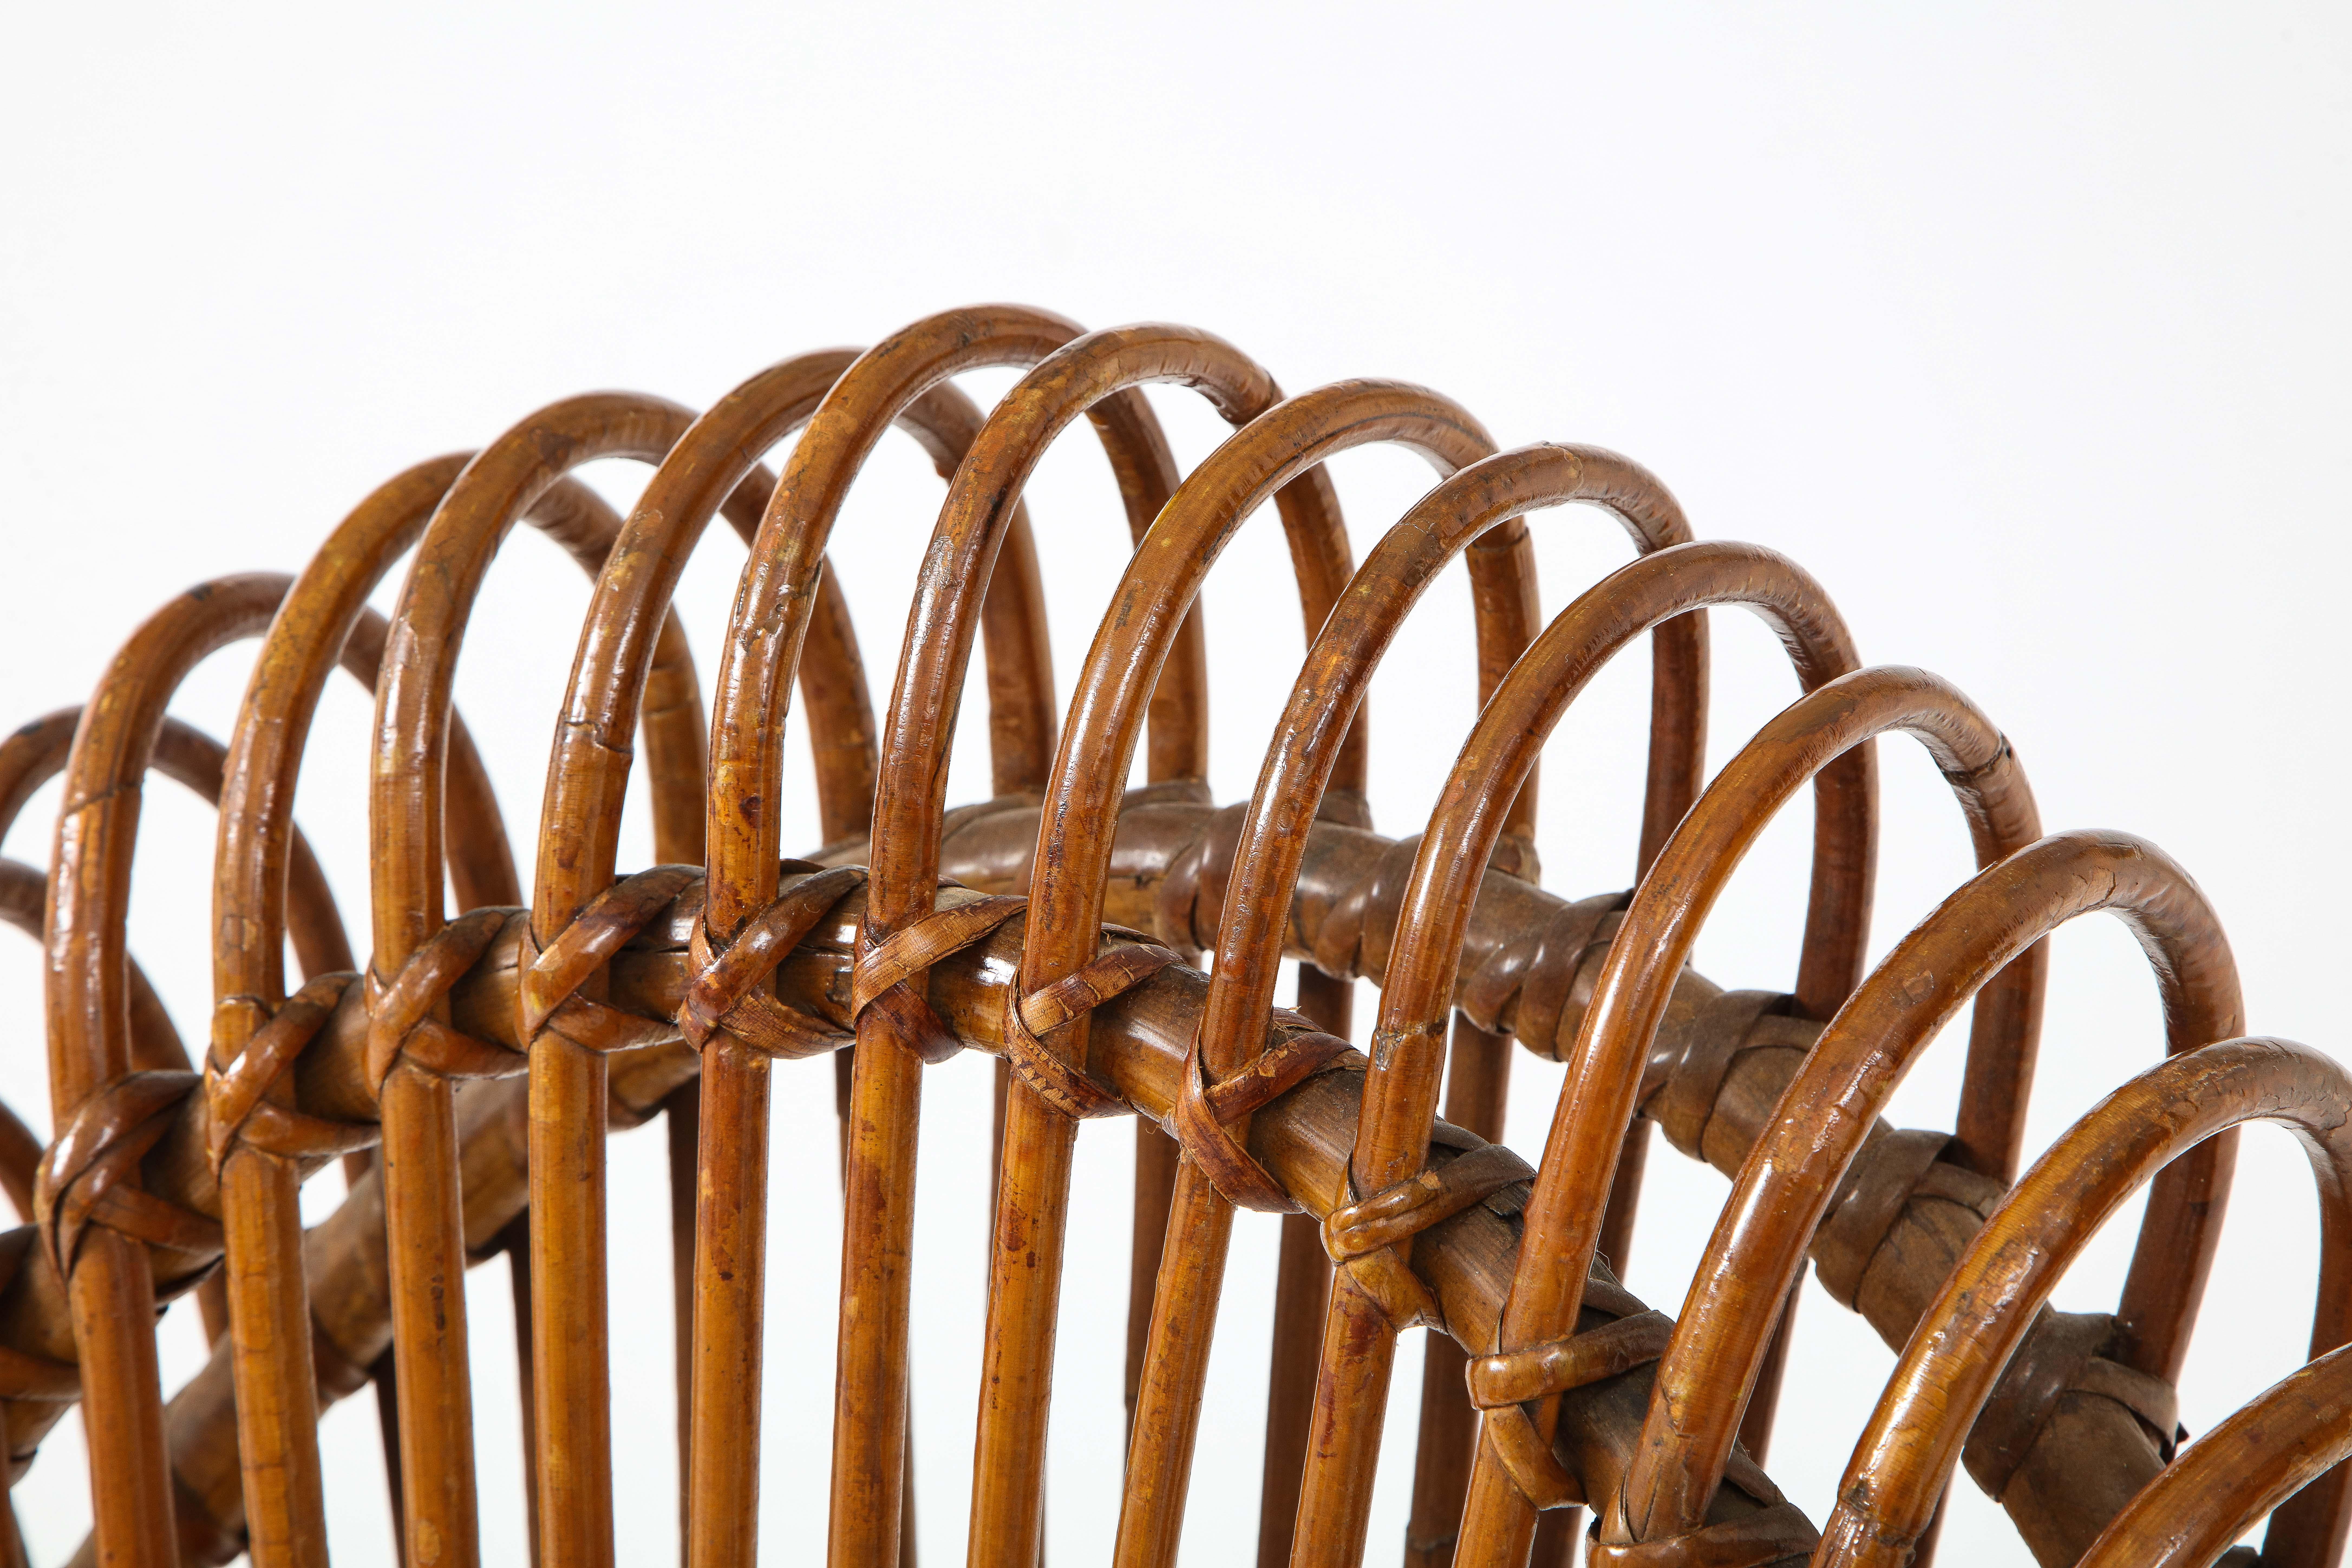 Enameled Janine Abraham and Dirk Jan Rol Sculptural Rattan Lounge Chair, France, 1950s For Sale